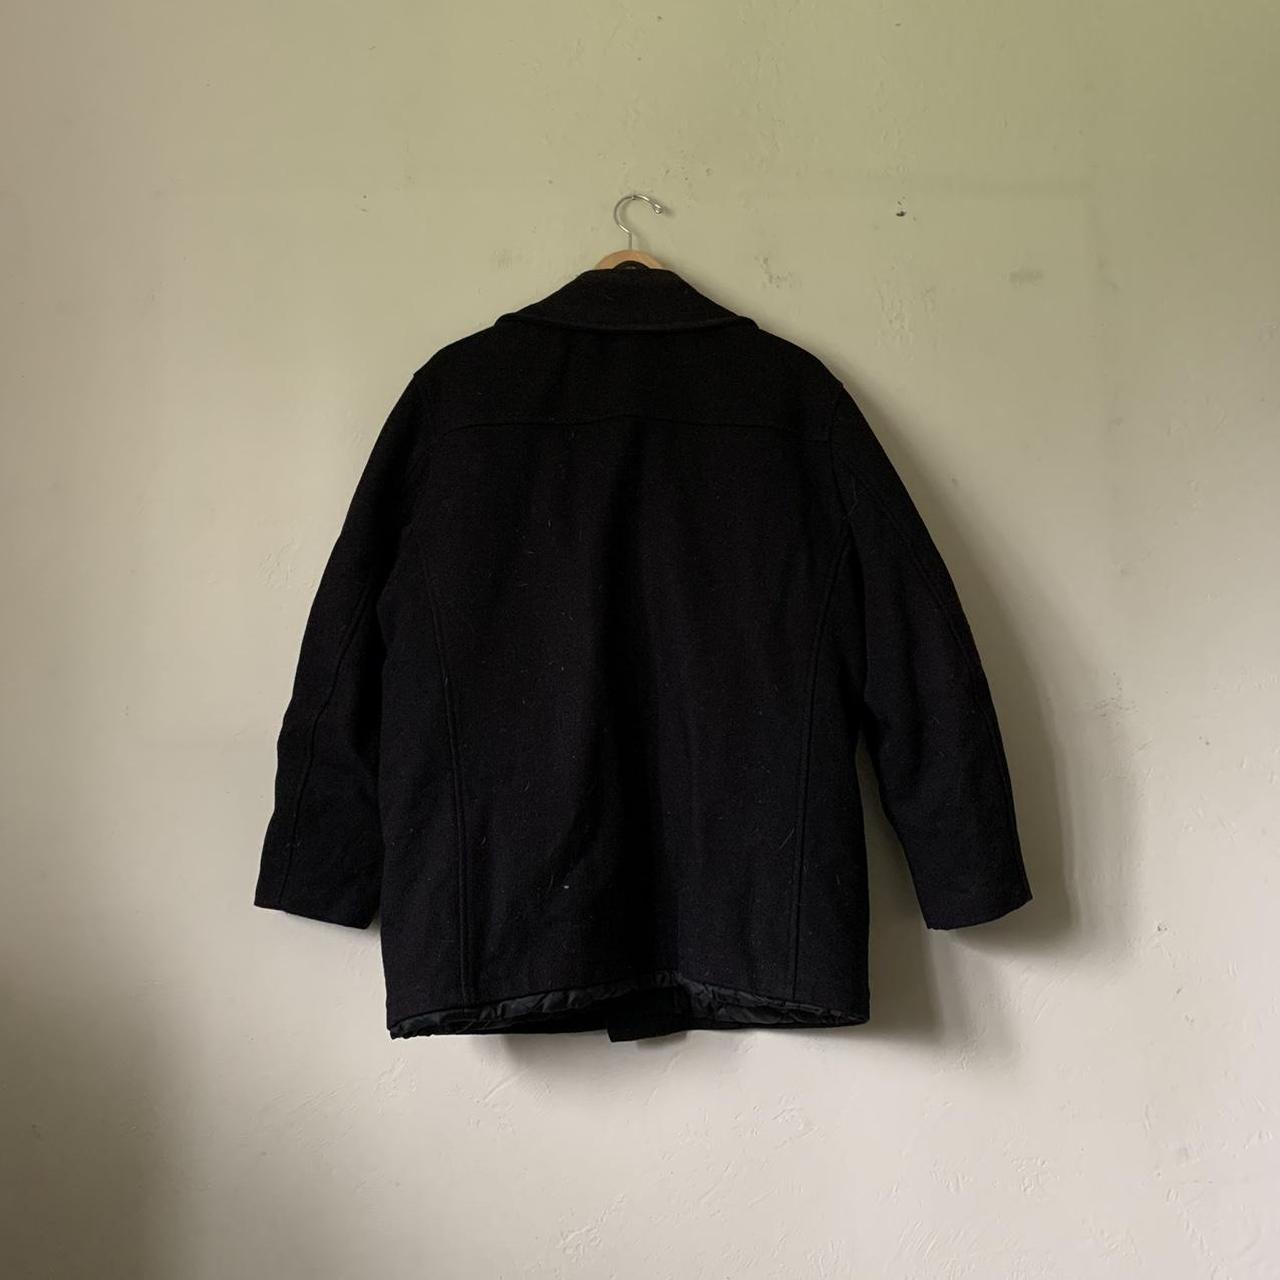 Product Image 3 - Vintage Schott Black Wool Overcoat

Tagged